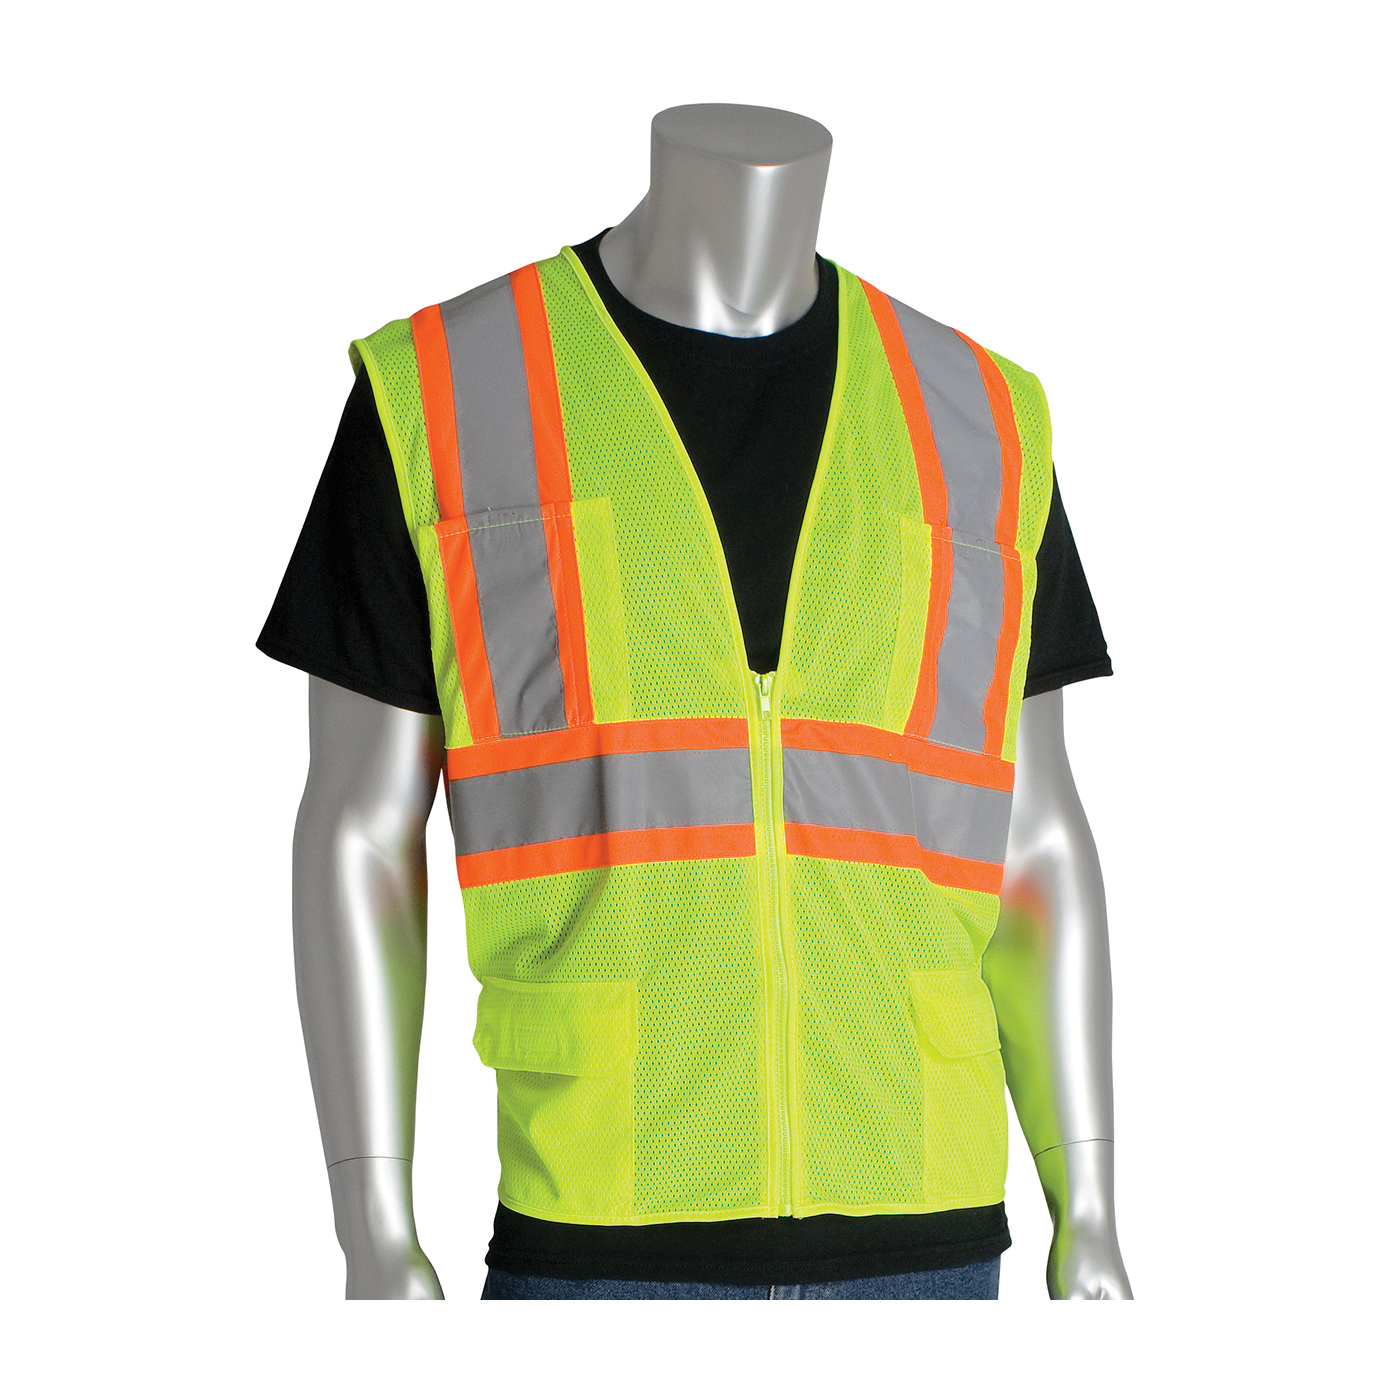 PIP® 302-MVZPLY-S 2-Tone Safety Vest, S, Hi-Viz Lime Yellow, Polyester Mesh, Zipper Closure, 6 Pockets, ANSI Class: Class 2, Specifications Met: ANSI 107 Type R